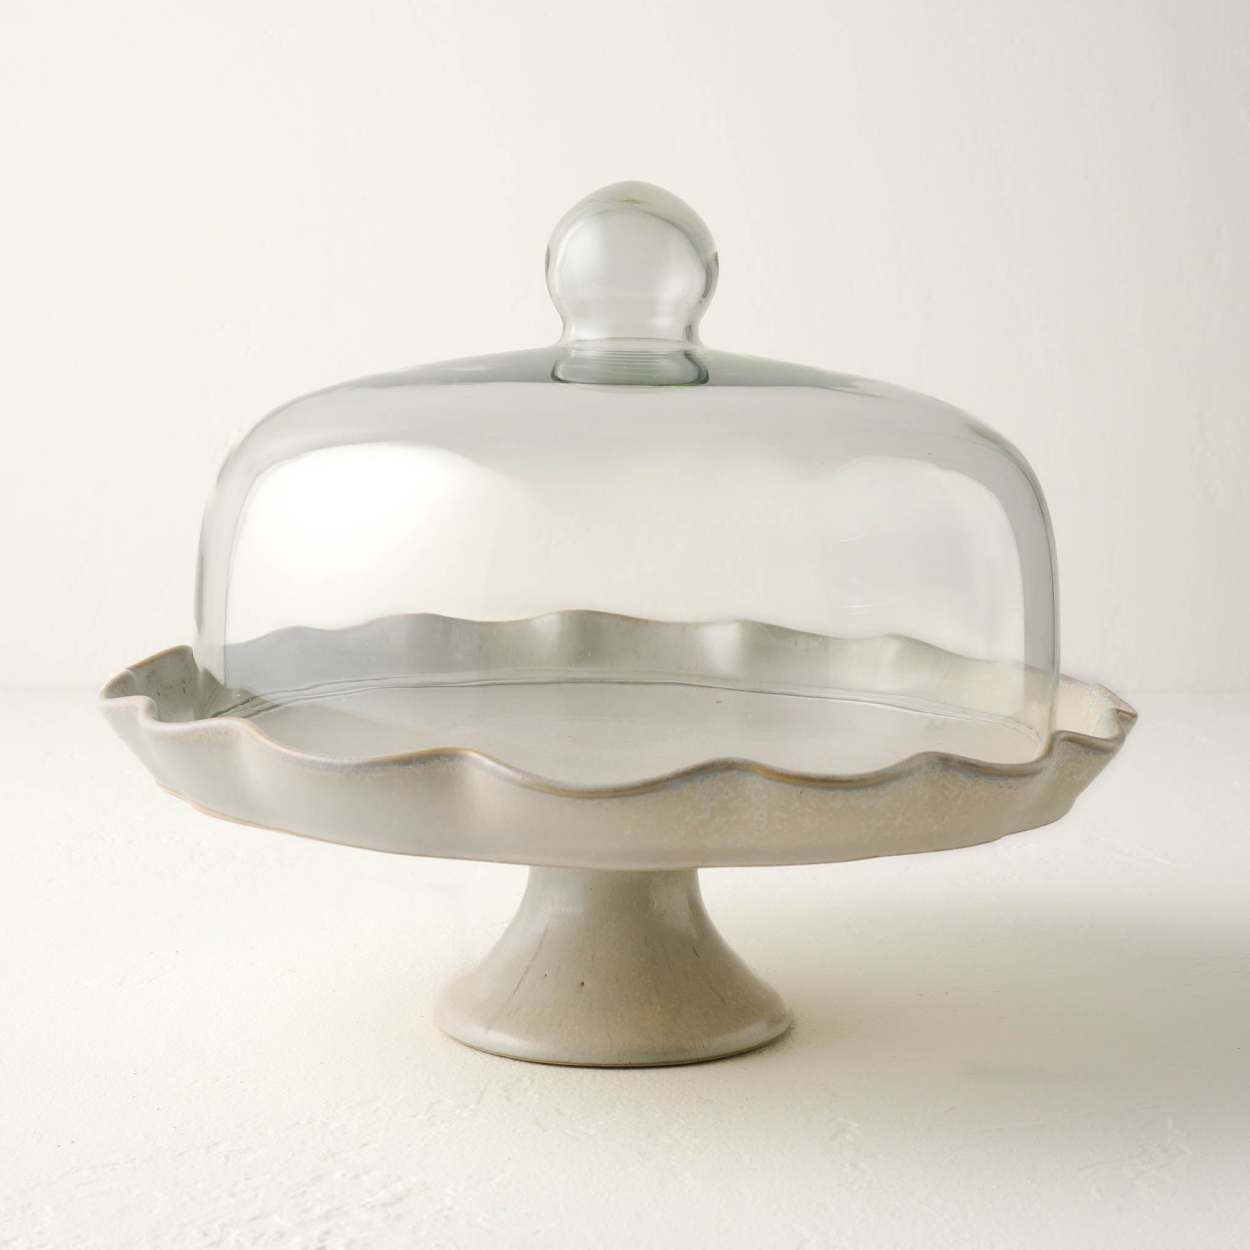 French Grey Ruffle Cake Stand with Dome | Magnolia